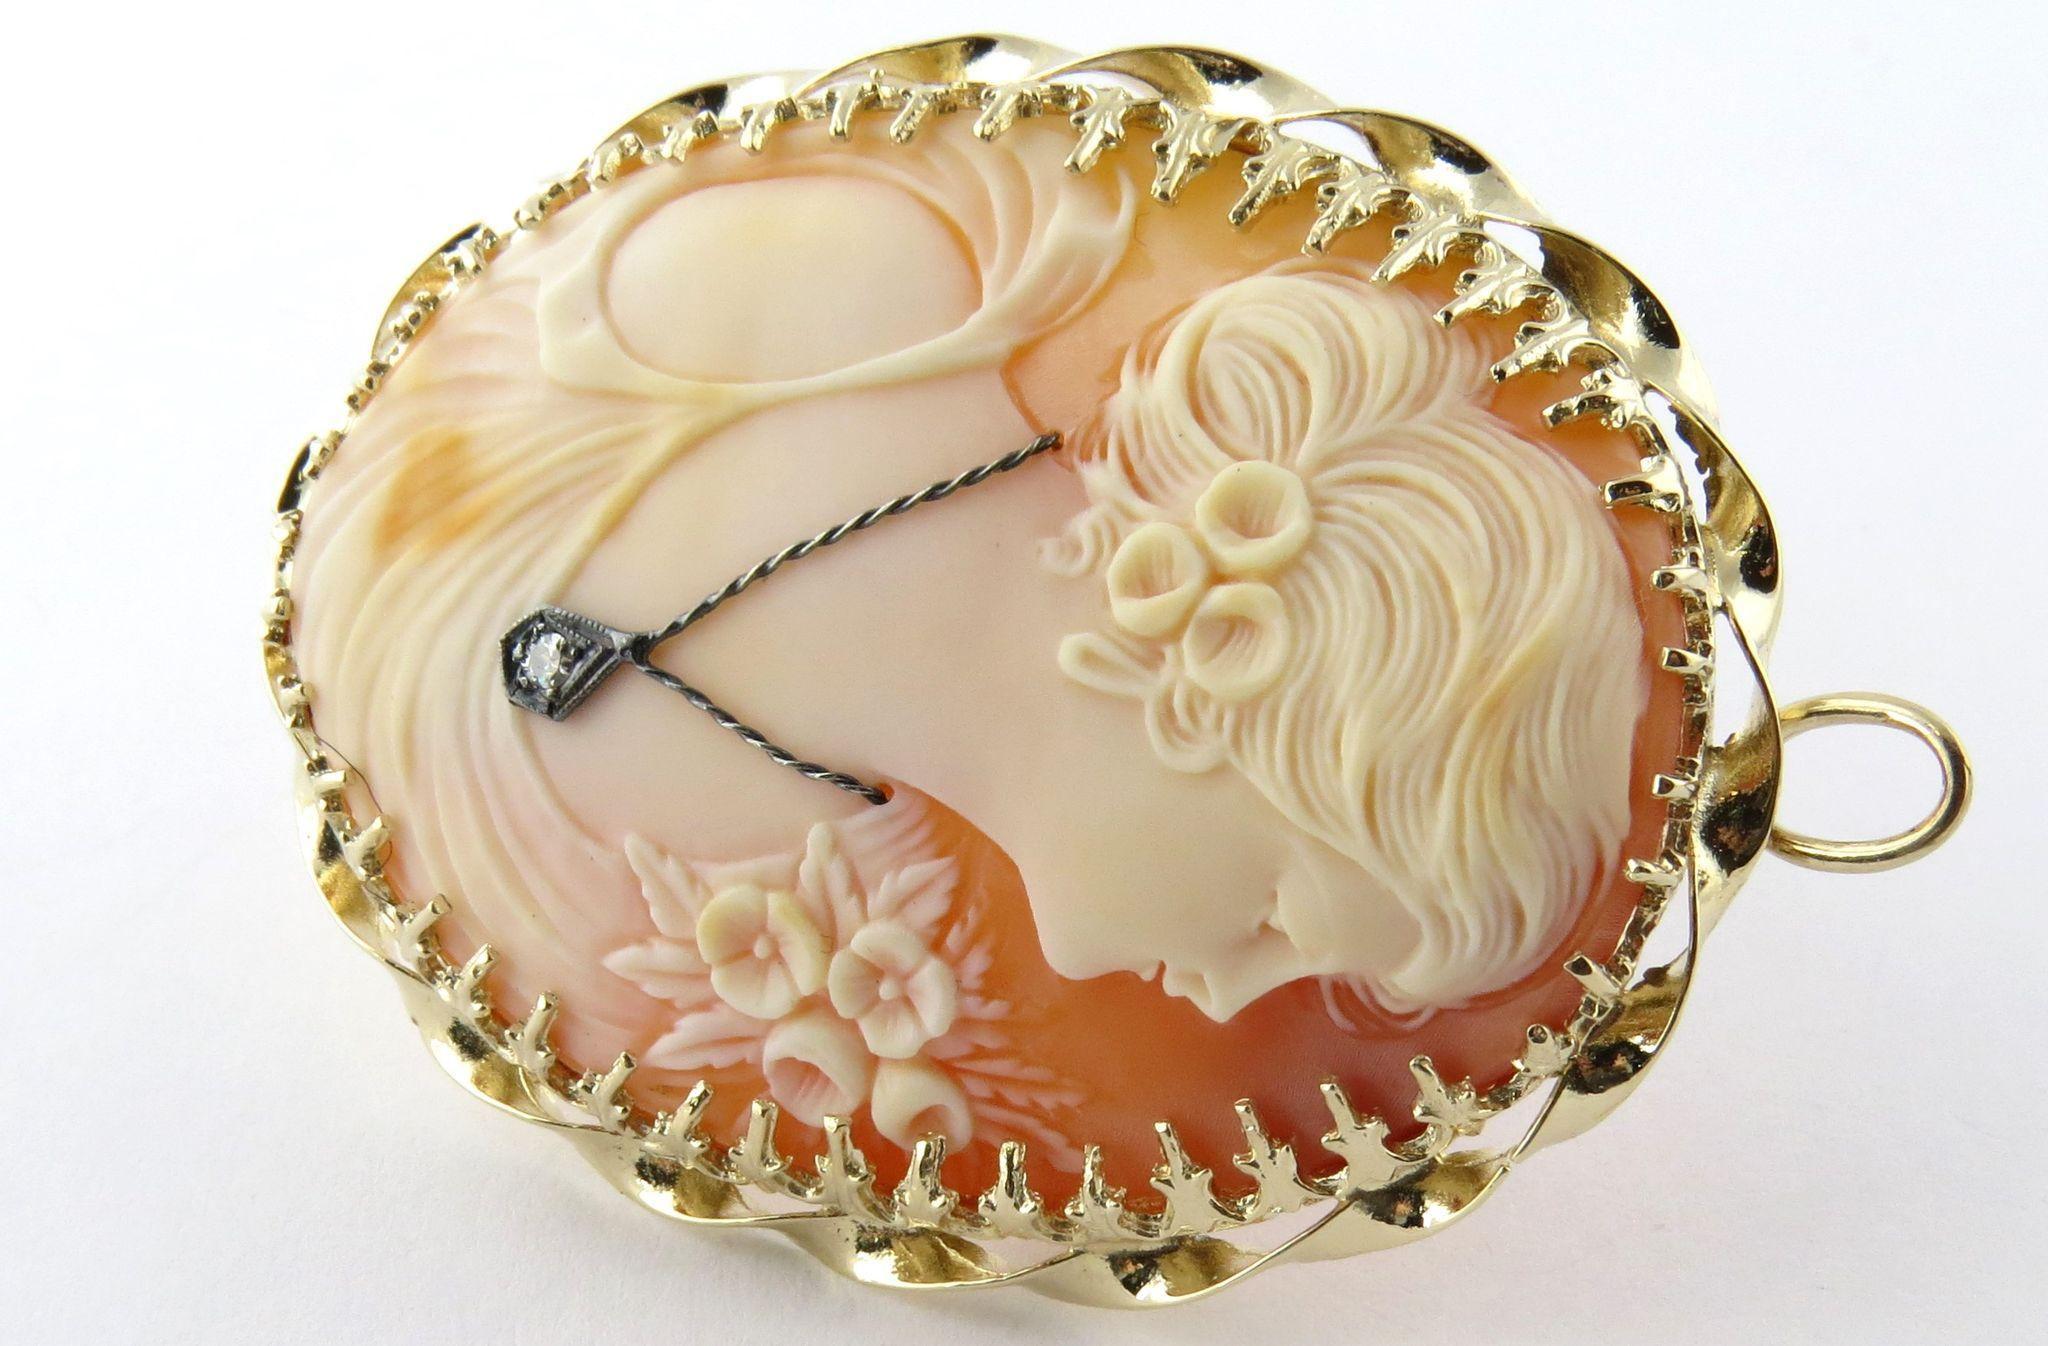 Classic Vintage Gibson Girl Cameo with Diamond Necklace 14K Yellow Gold Pin or Pendant. 

Intricately hand carved shell of a classic Gibson girl set in a pronged twisted gold frame. She wears a white gold diamond necklace around her neck adding to